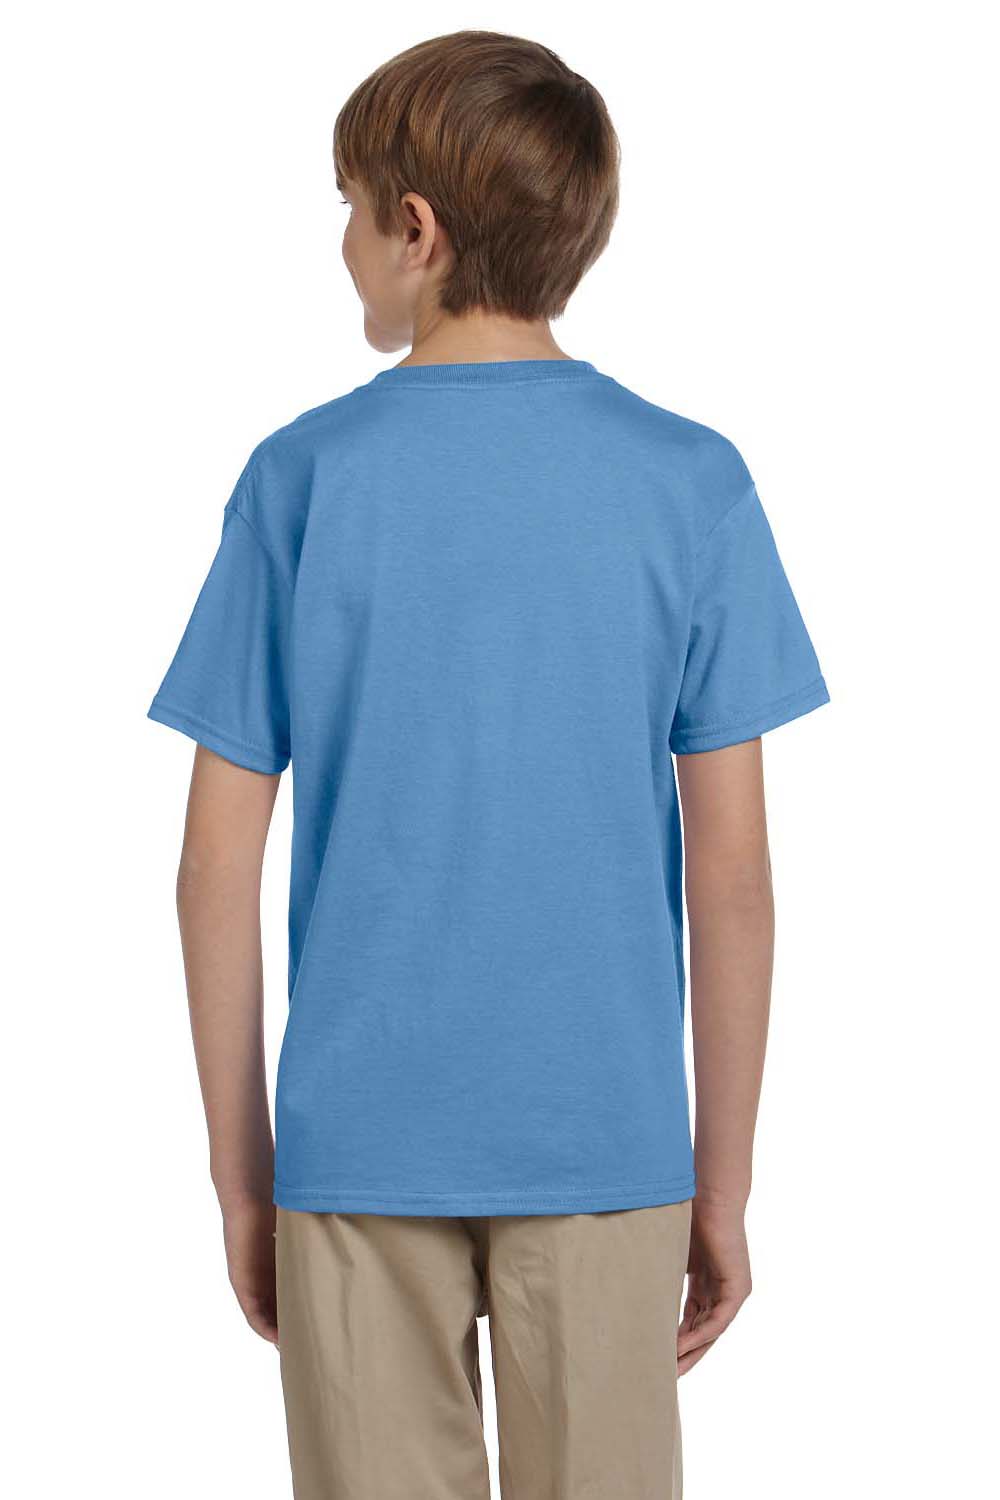 Fruit Of The Loom 3931B Youth HD Jersey Short Sleeve Crewneck T-Shirt Columbia Blue Back